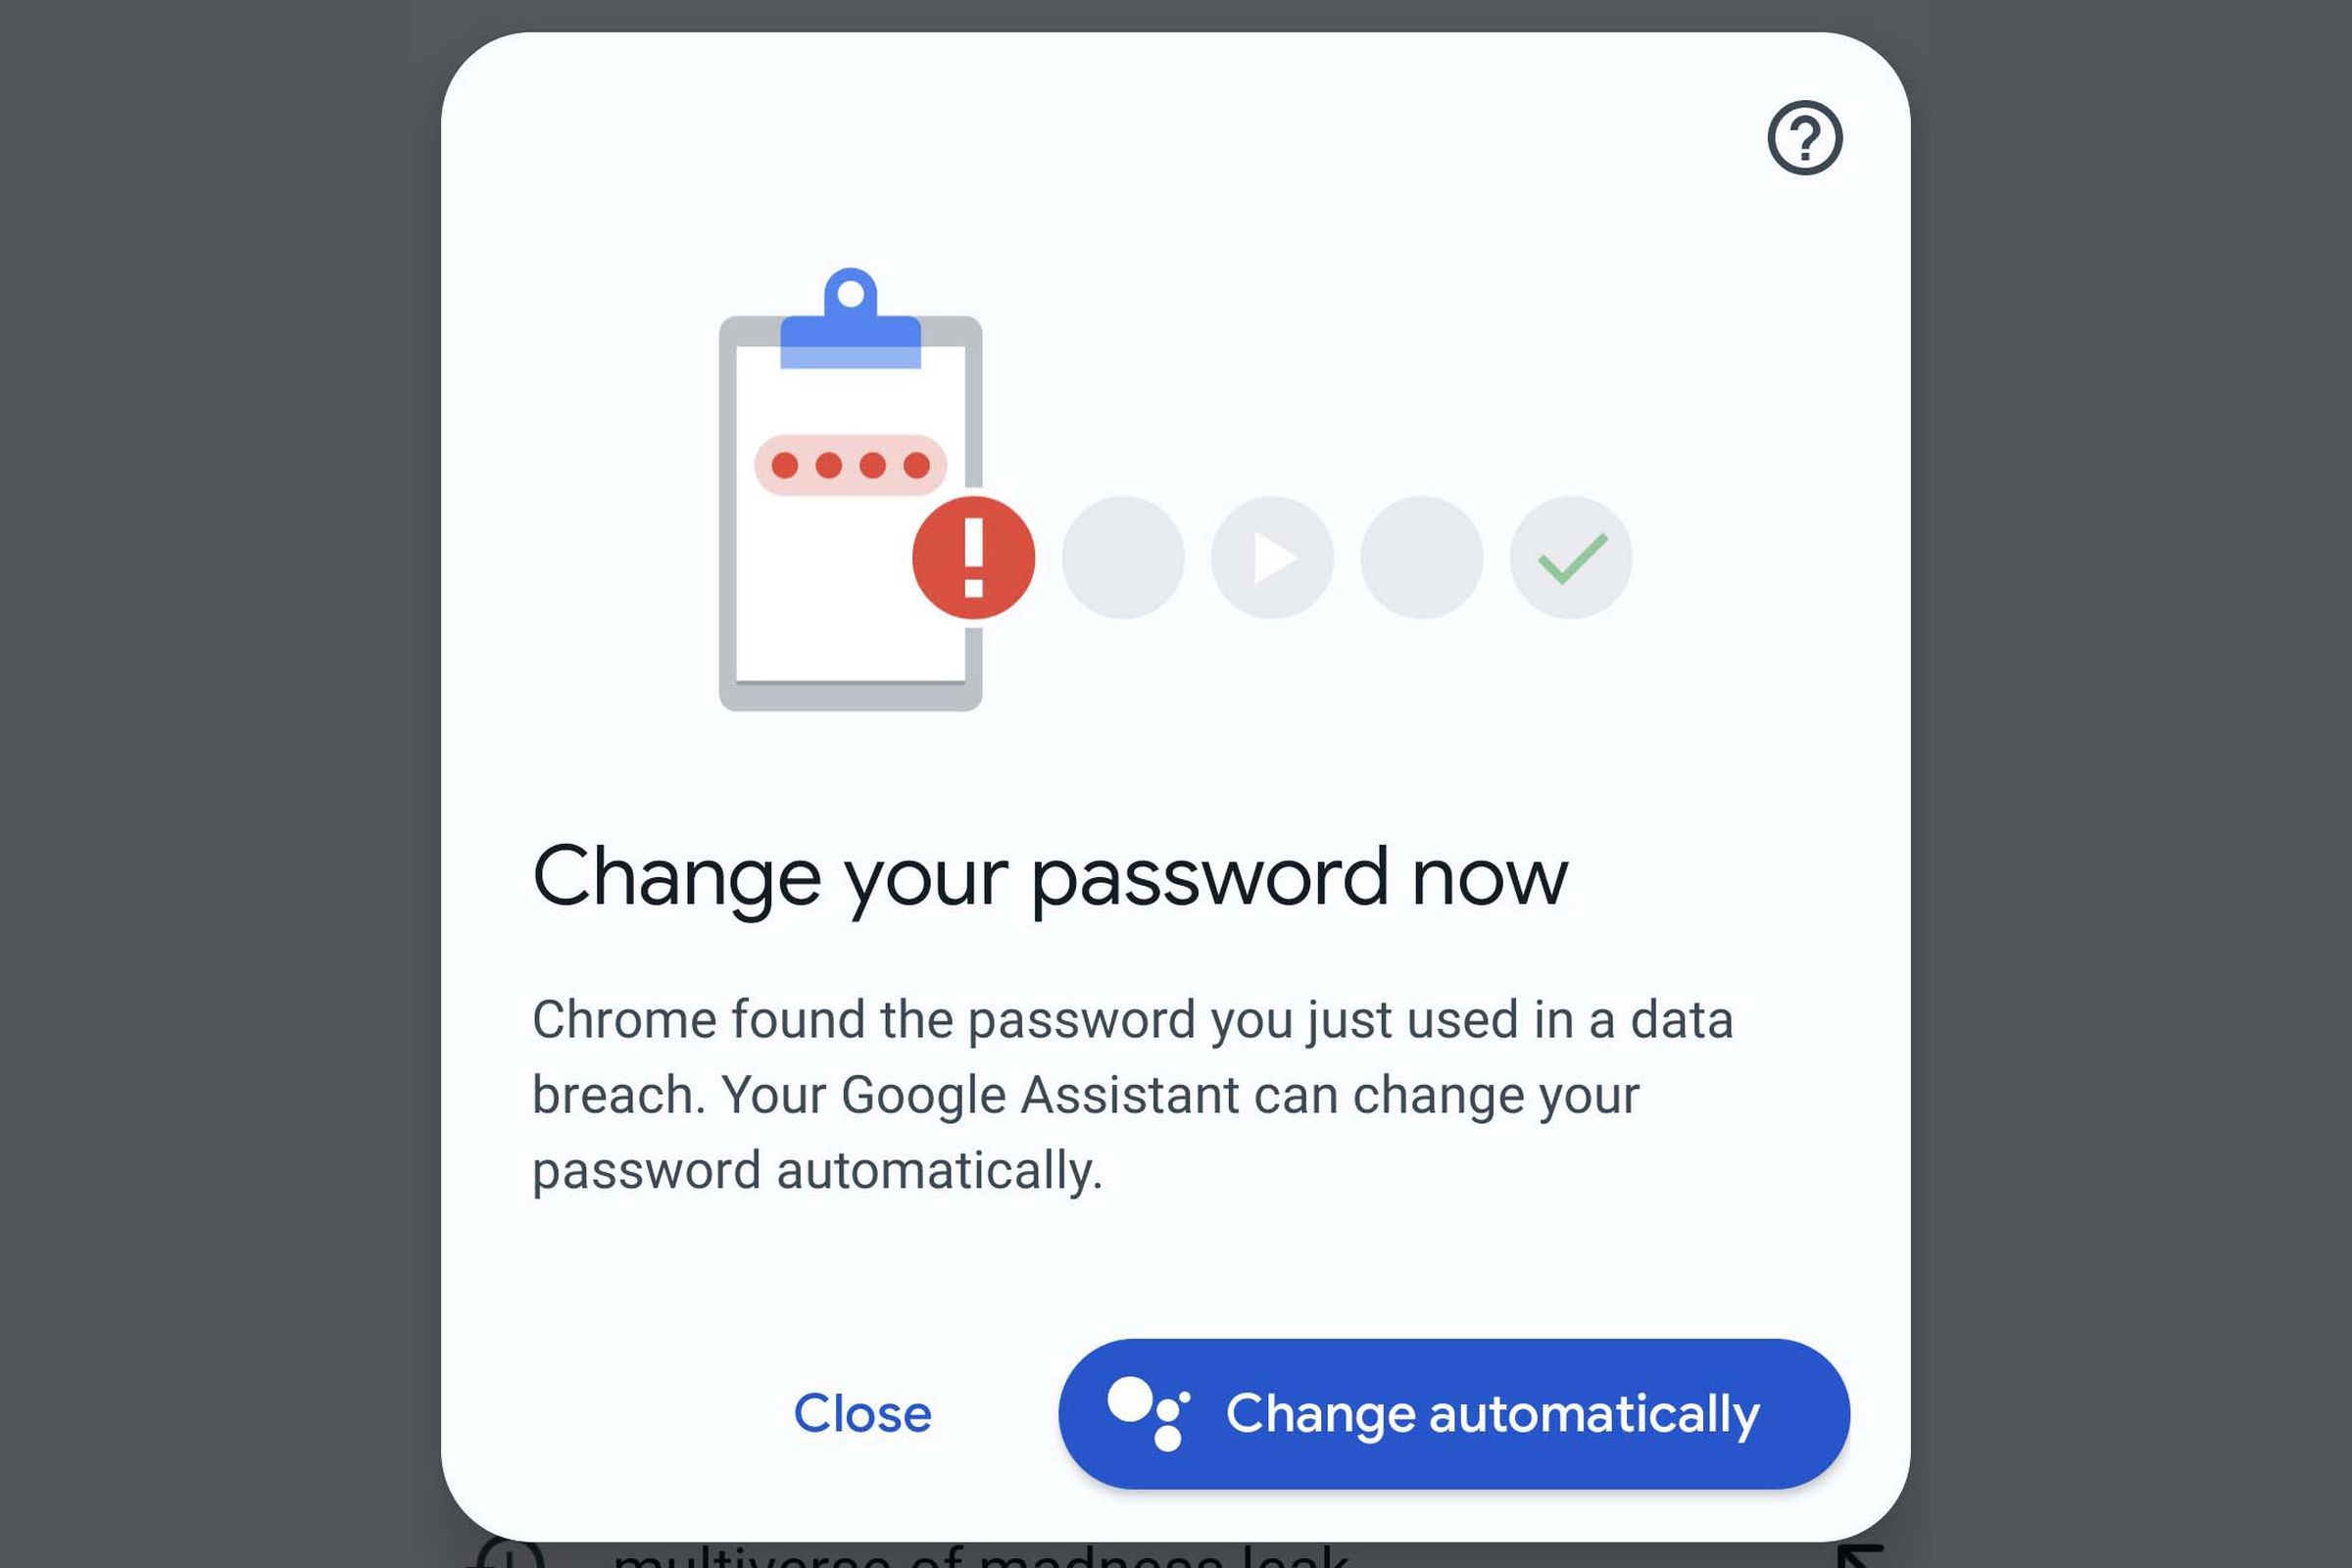 The feature offers to automatically change a compromised password.